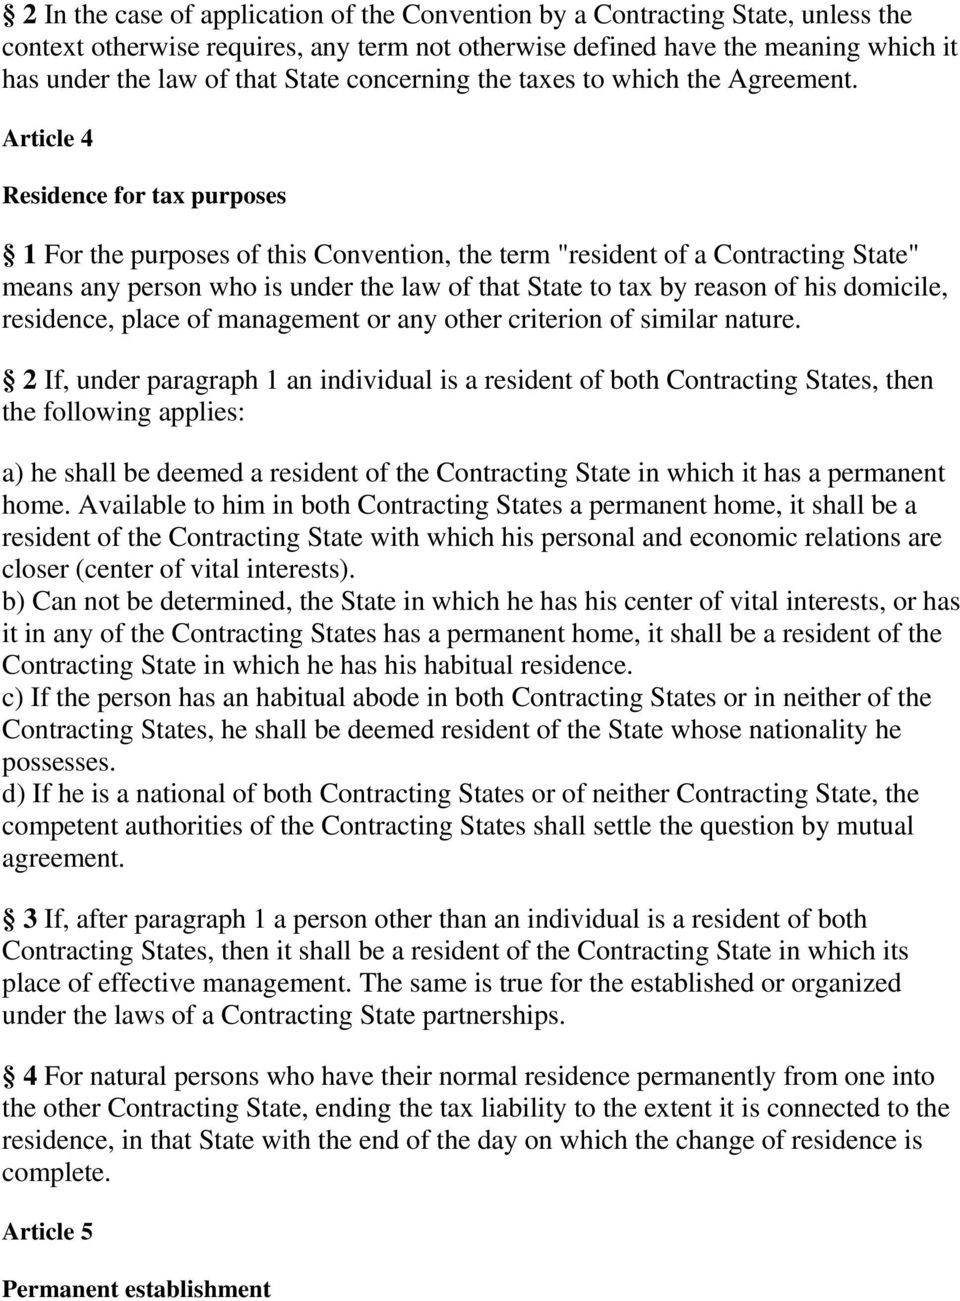 Article 4 Residence for tax purposes 1 For the purposes of this Convention, the term "resident of a Contracting State" means any person who is under the law of that State to tax by reason of his